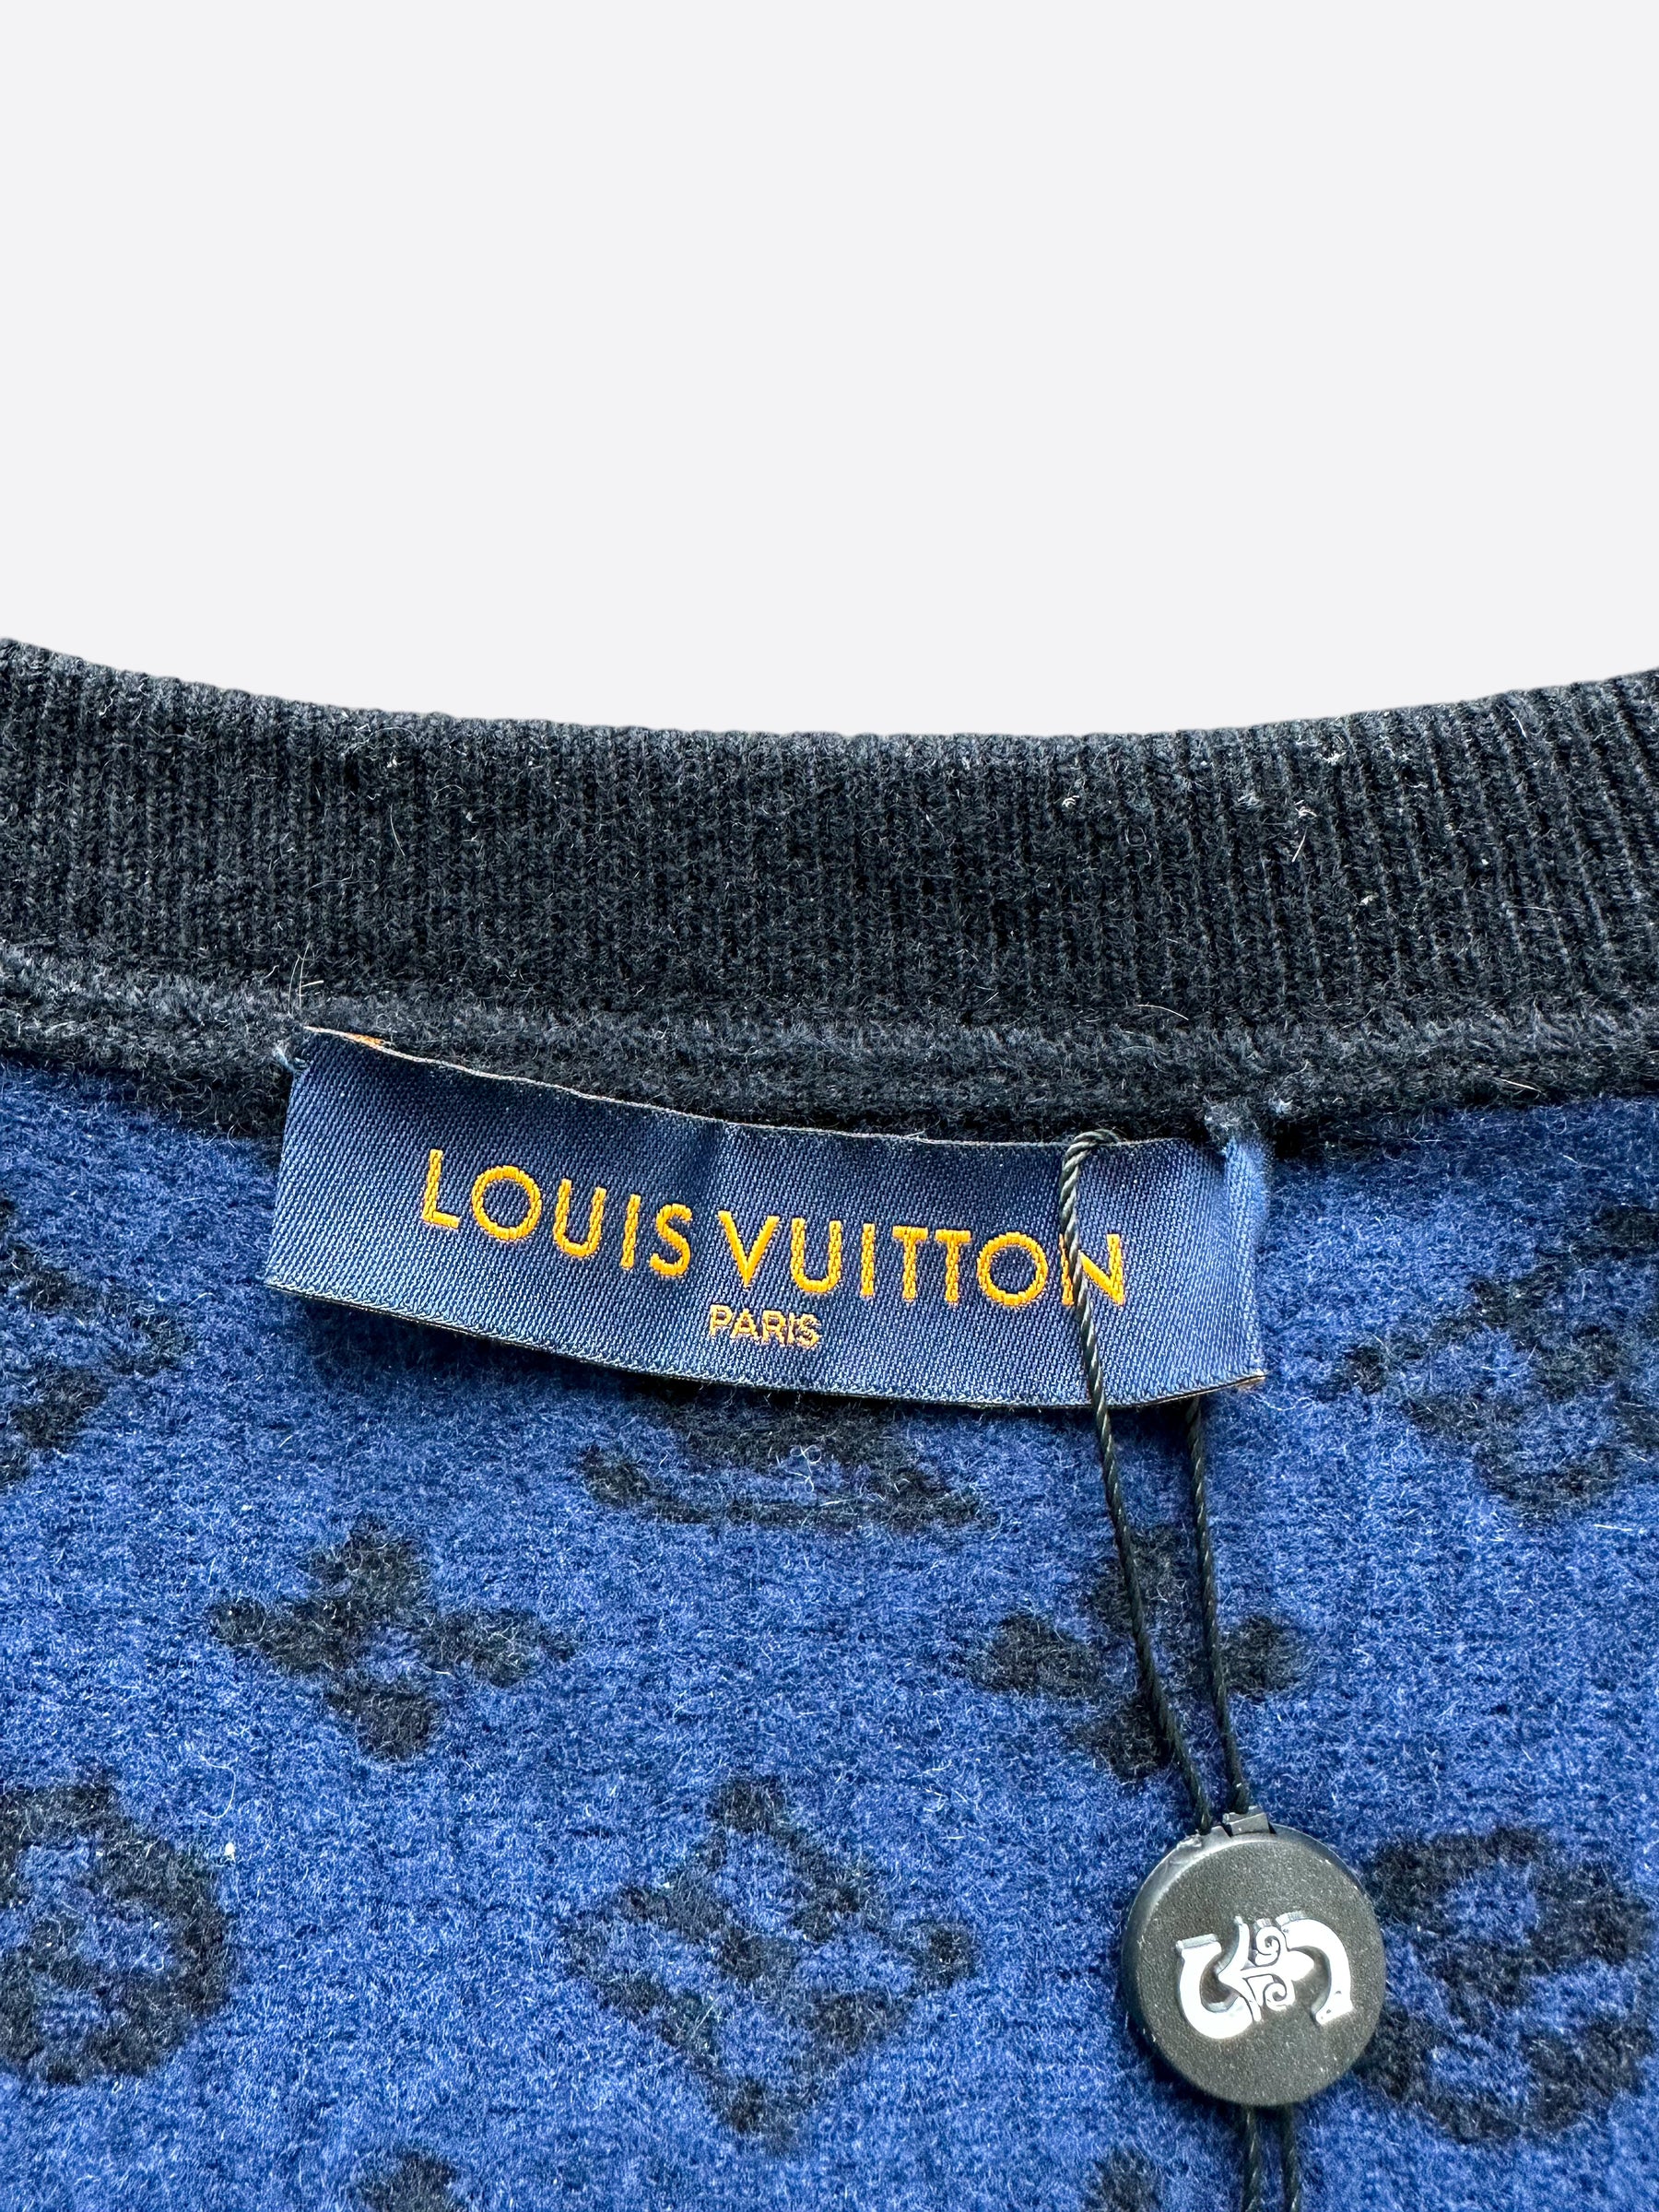 Louis Vuitton Monogram Pattern Half & Half Monogram Cashmere Sweater  Pullover w/ Tags - Grey Sweaters, Clothing - LOU479926